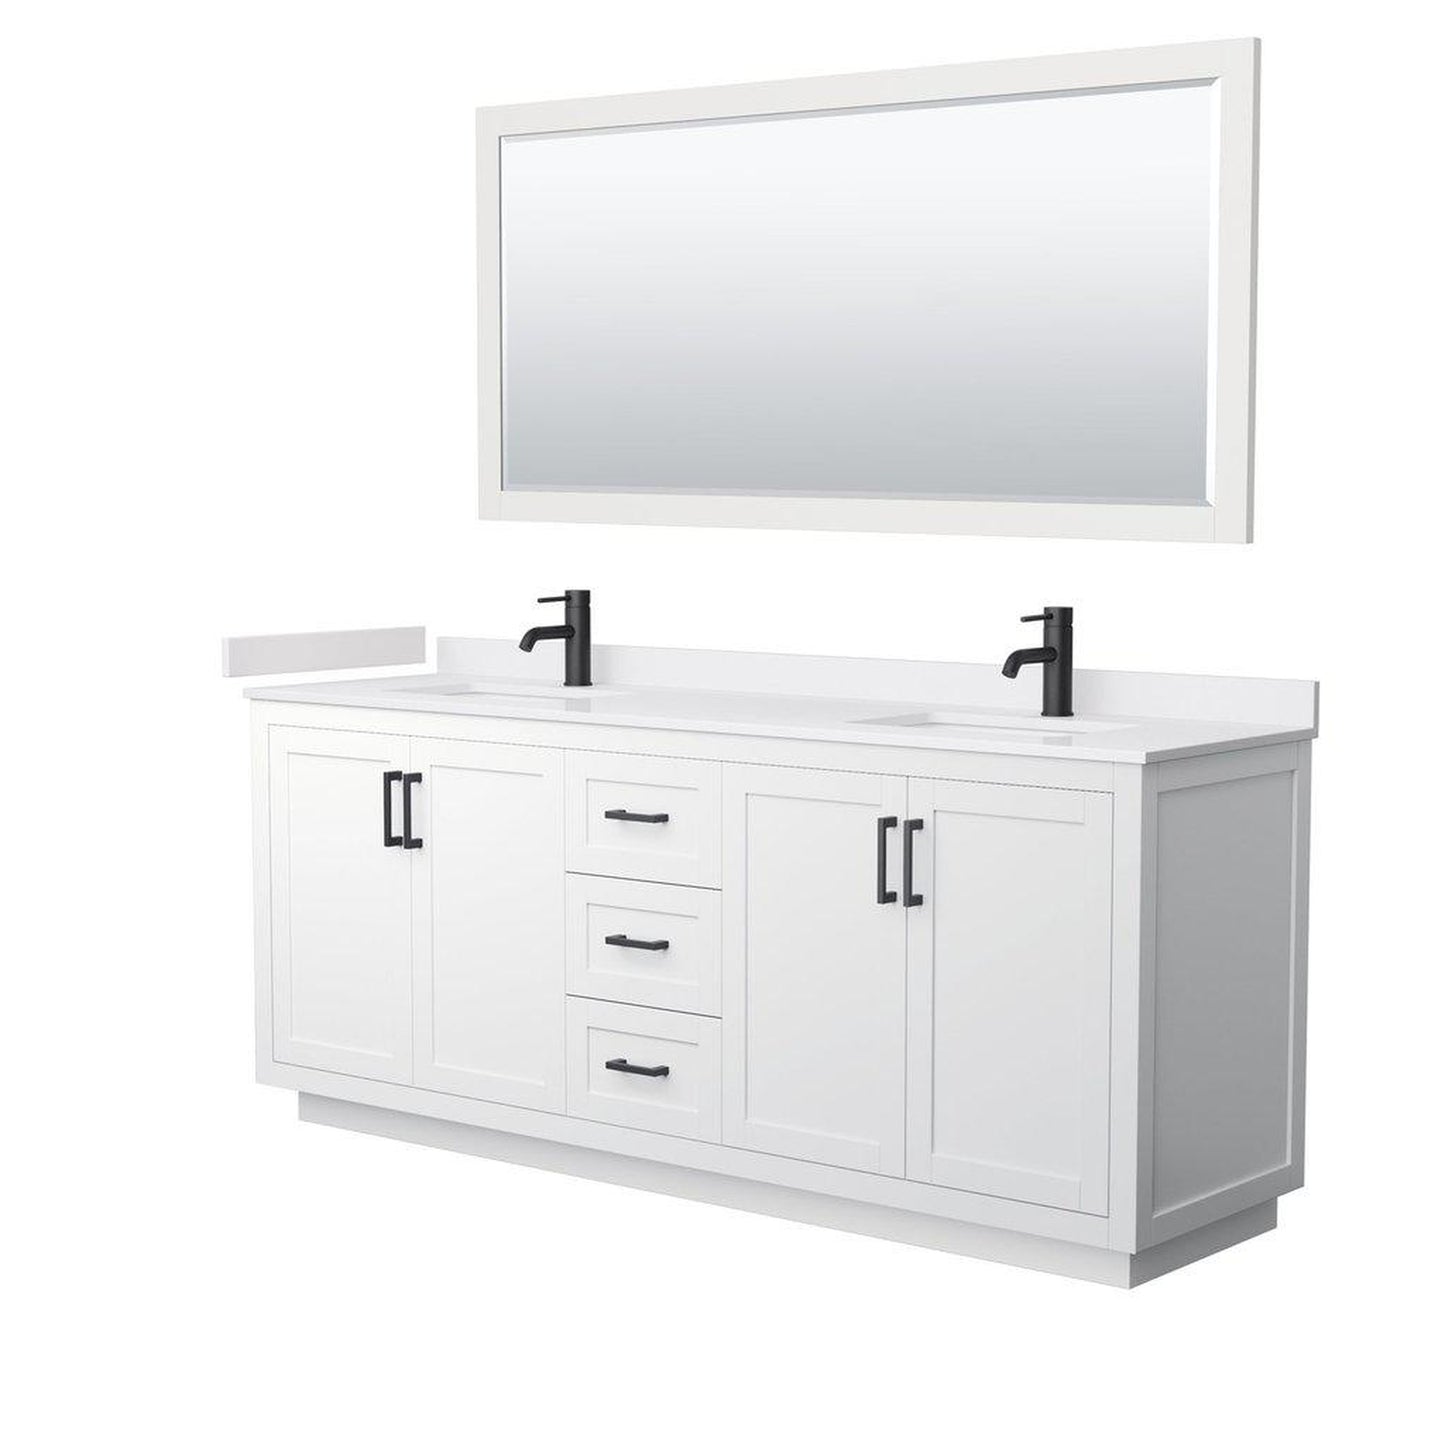 Wyndham Collection Miranda 80" Double Bathroom White Vanity Set With White Cultured Marble Countertop, Undermount Square Sink, 70" Mirror And Matte Black Trim